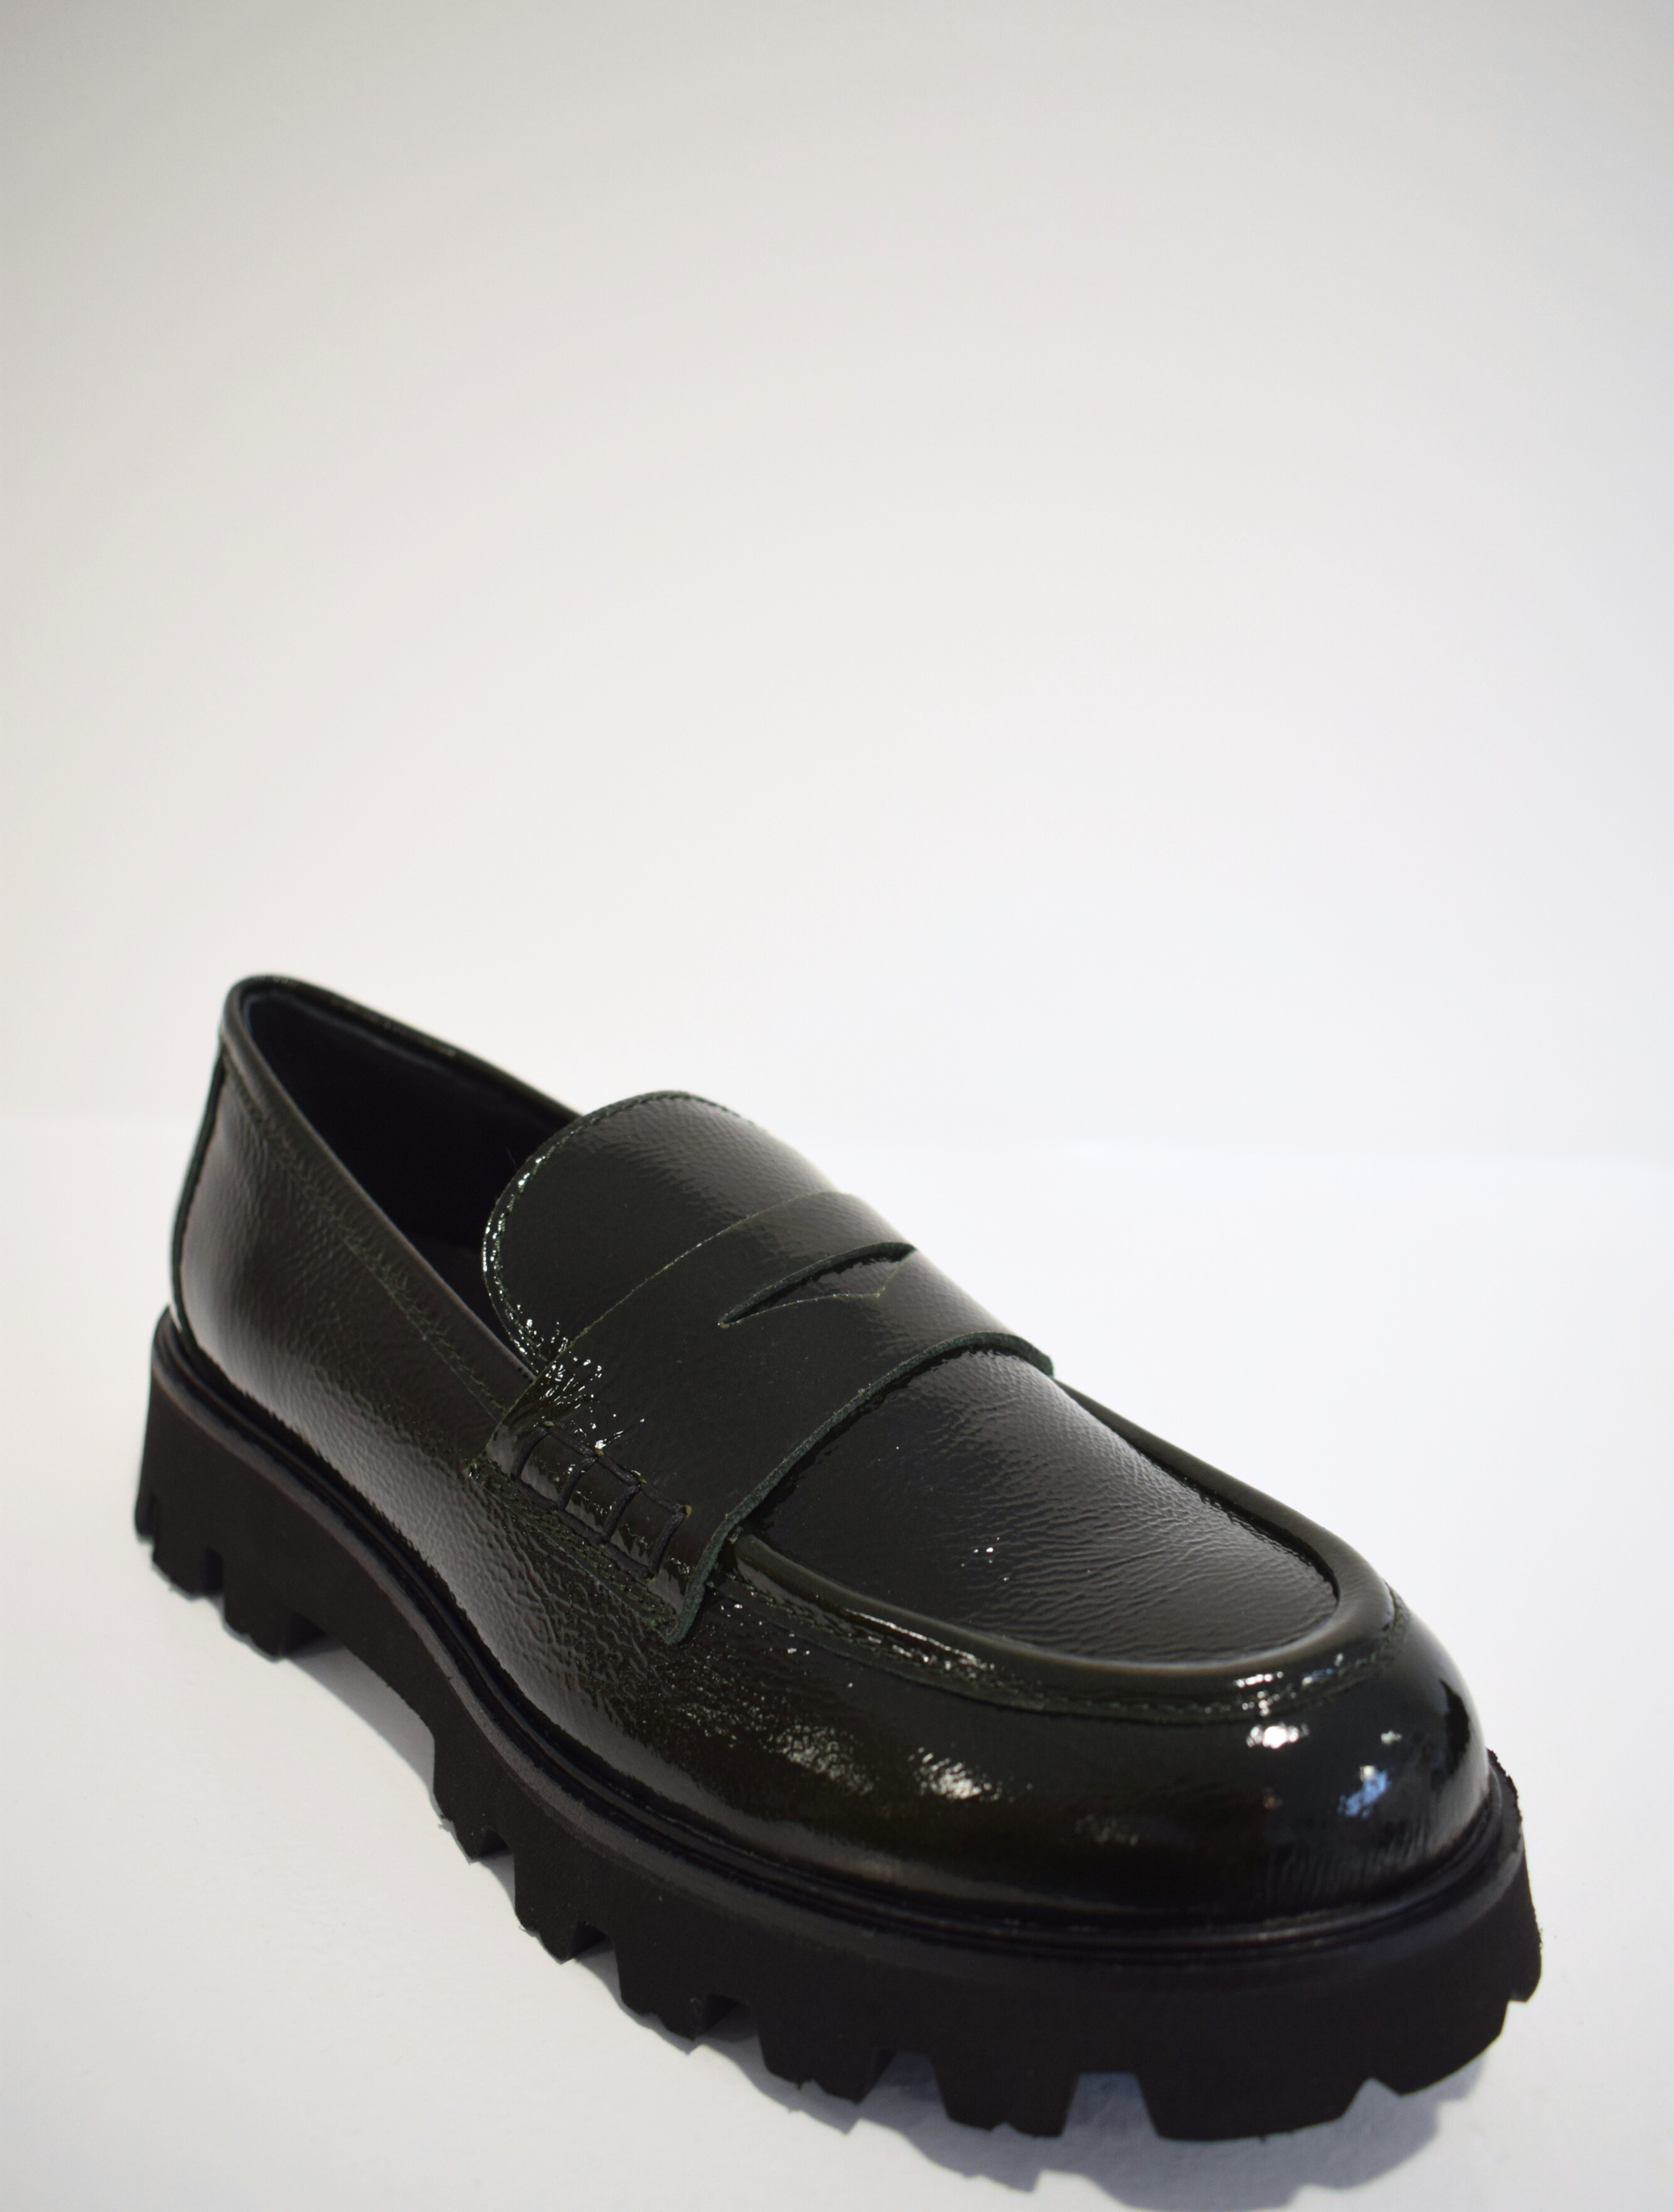 Patent moss green penny loafers with chunky black sole